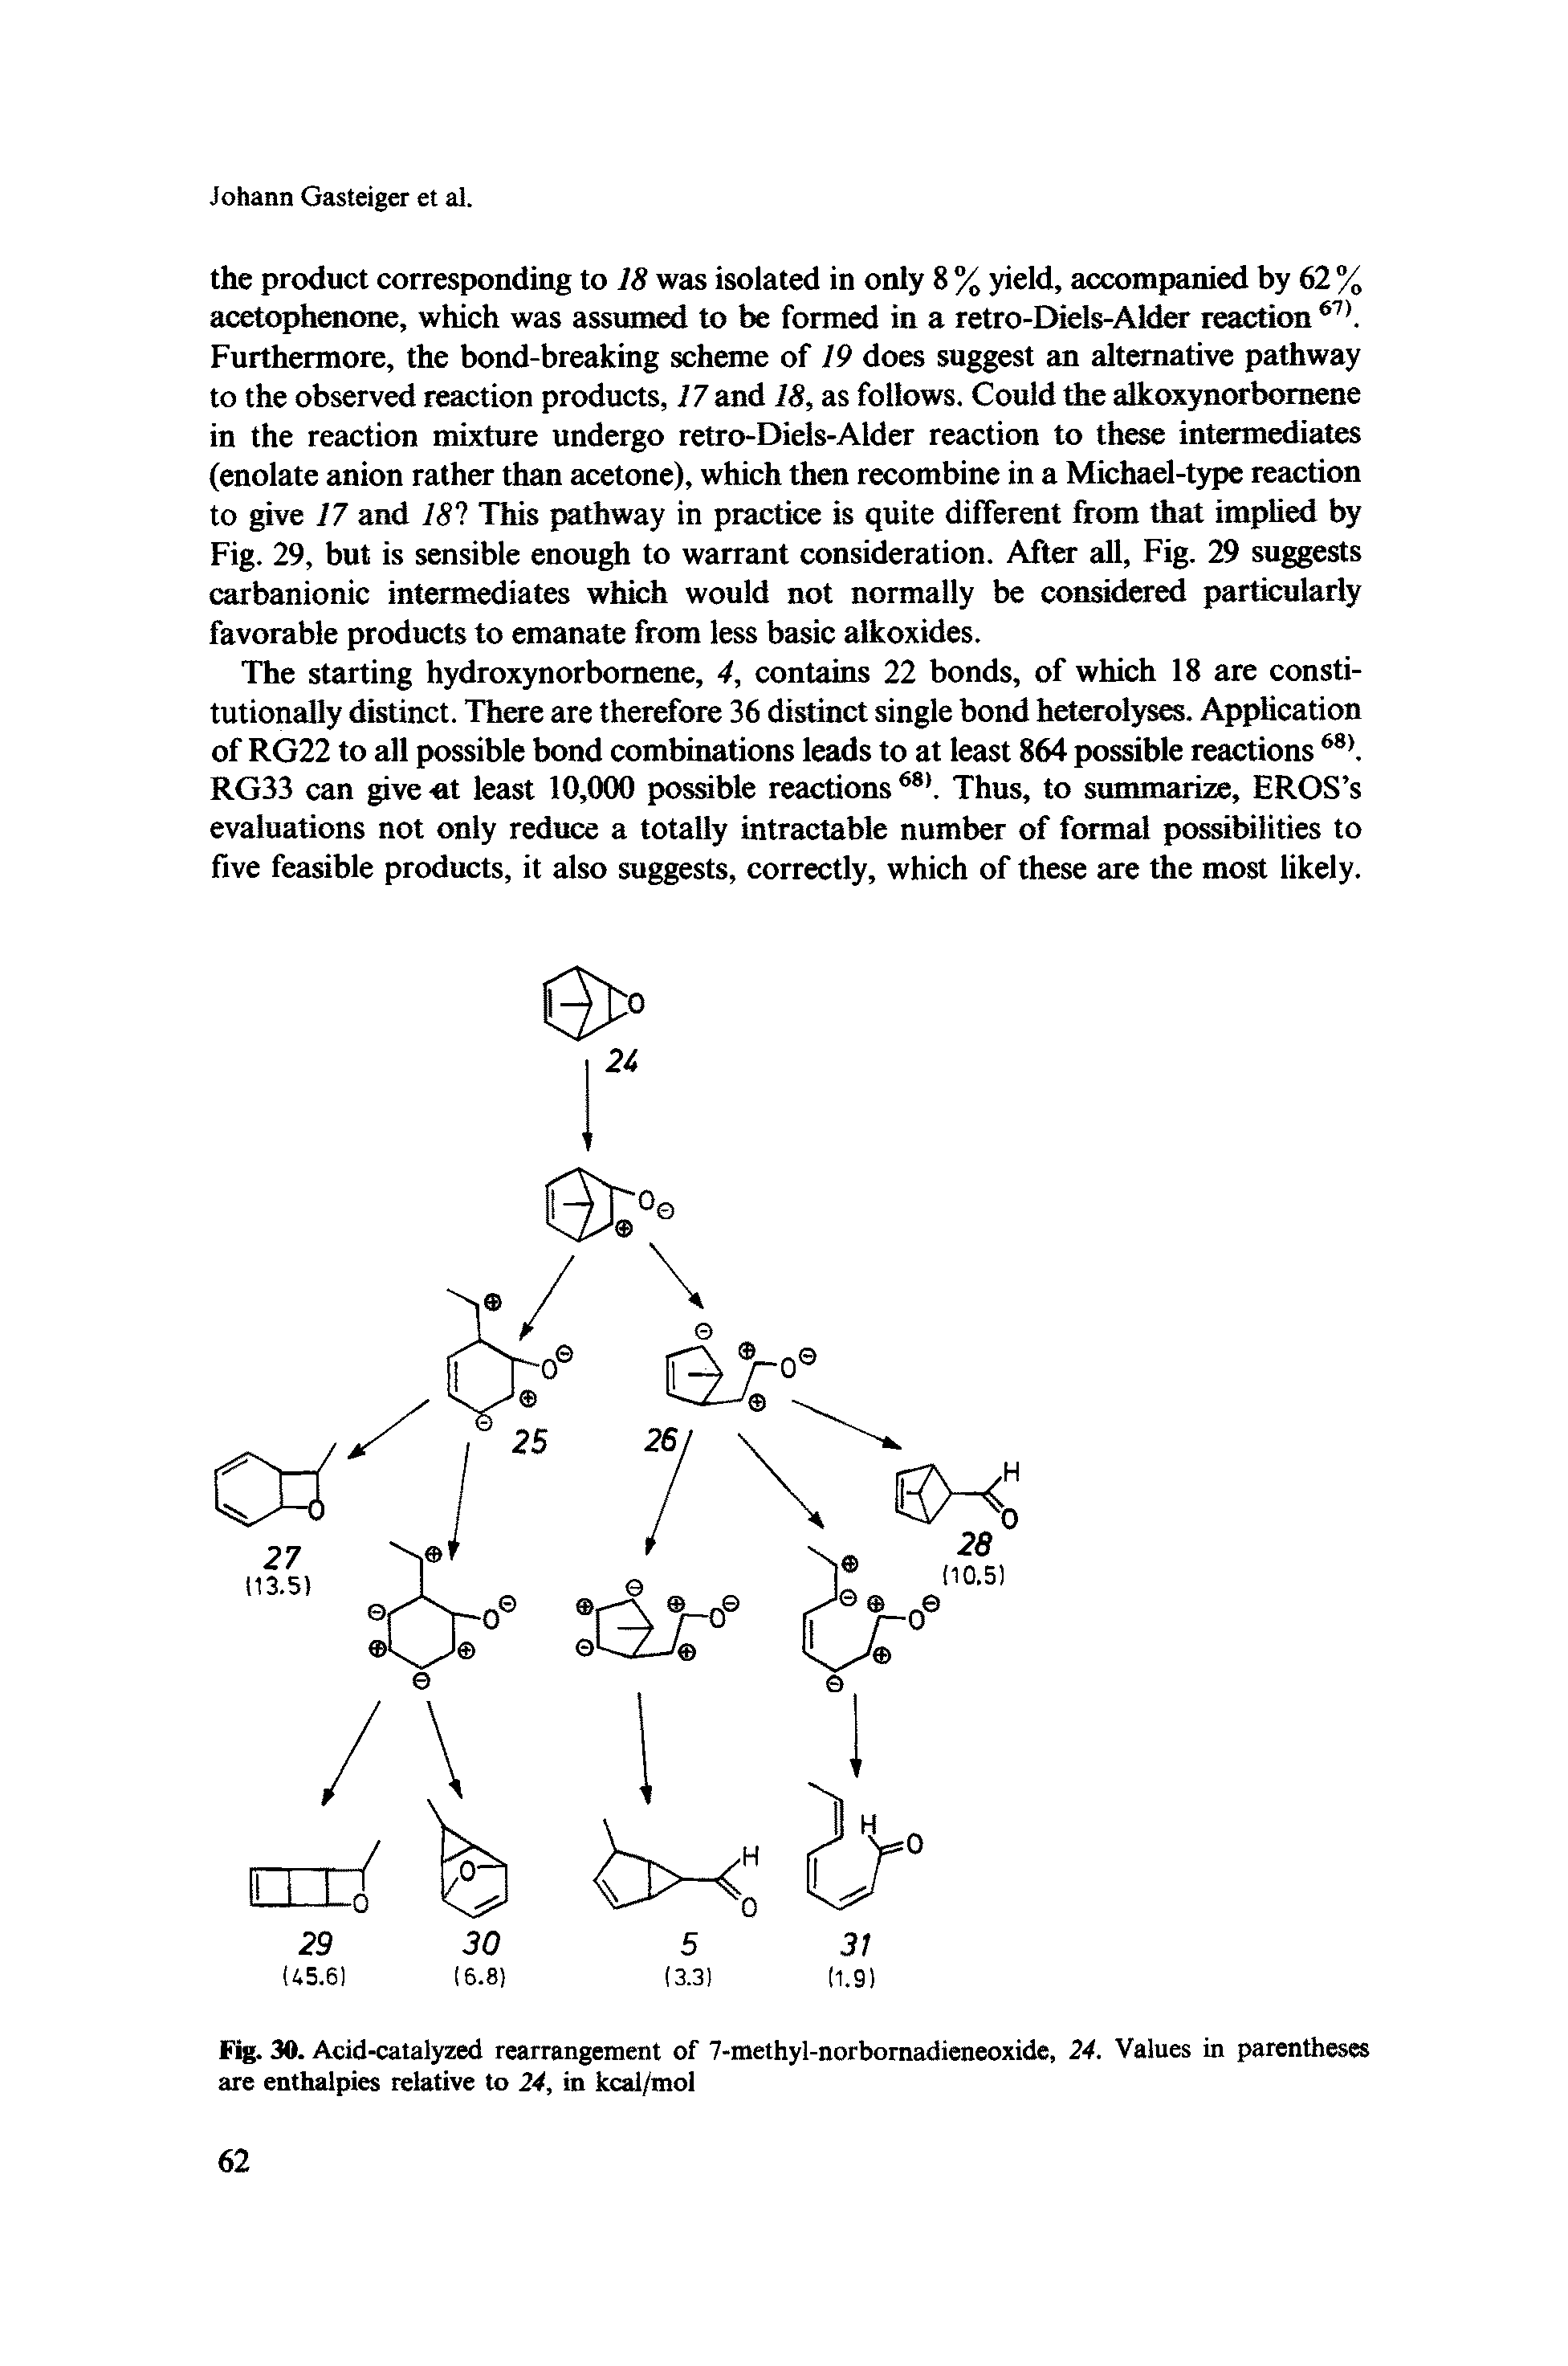 Fig. 30. Acid-catalyzed rearrangement of 7-methyl-norbornadieneoxide, 24. Values in parentheses are enthalpies relative to 24, in kcal/mol...